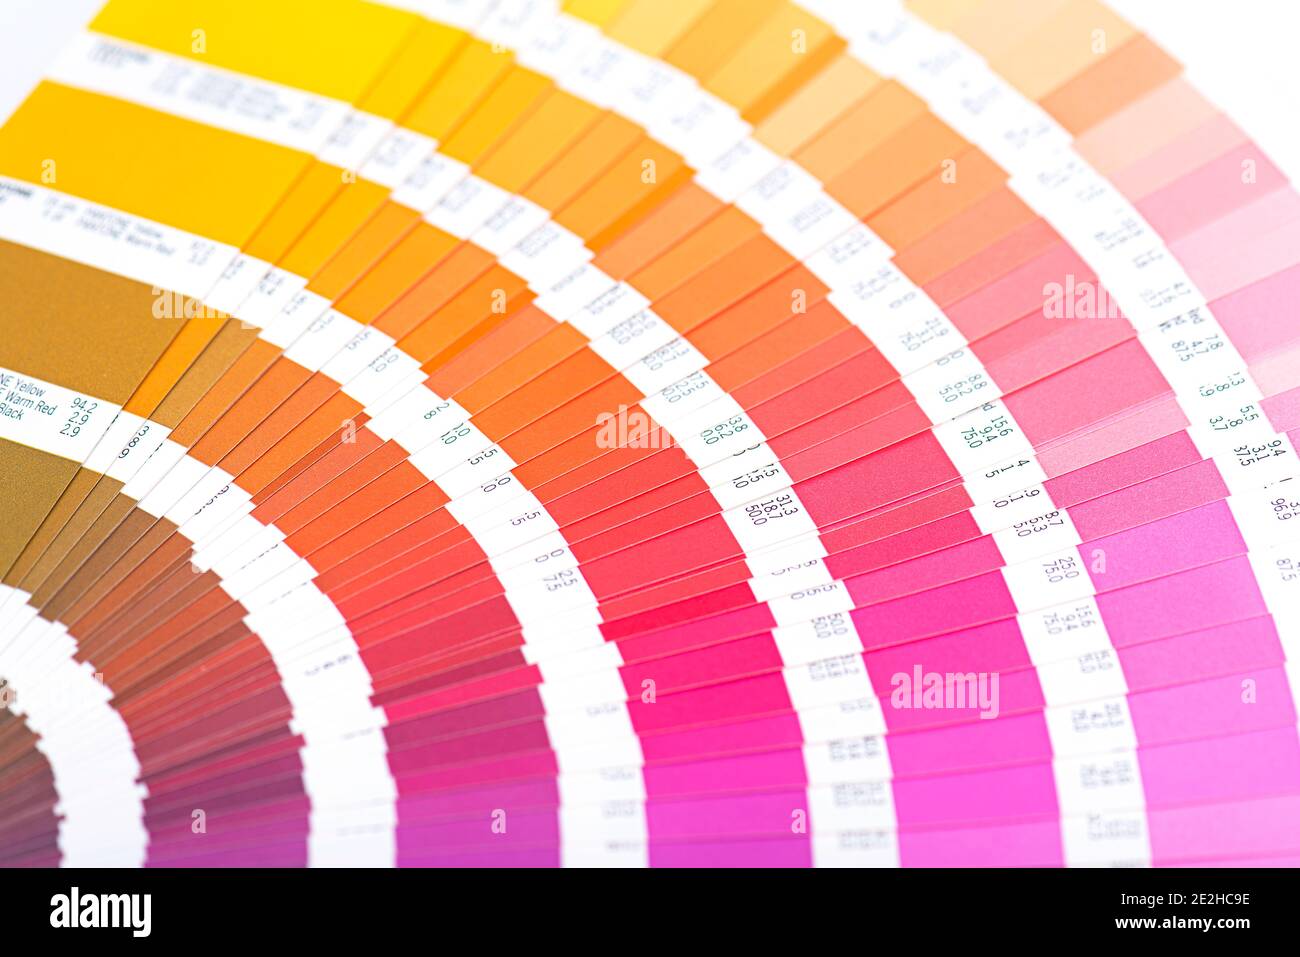 Paper color palette, palette guide as yellow, orange, pink, red color,  top view Stock Photo